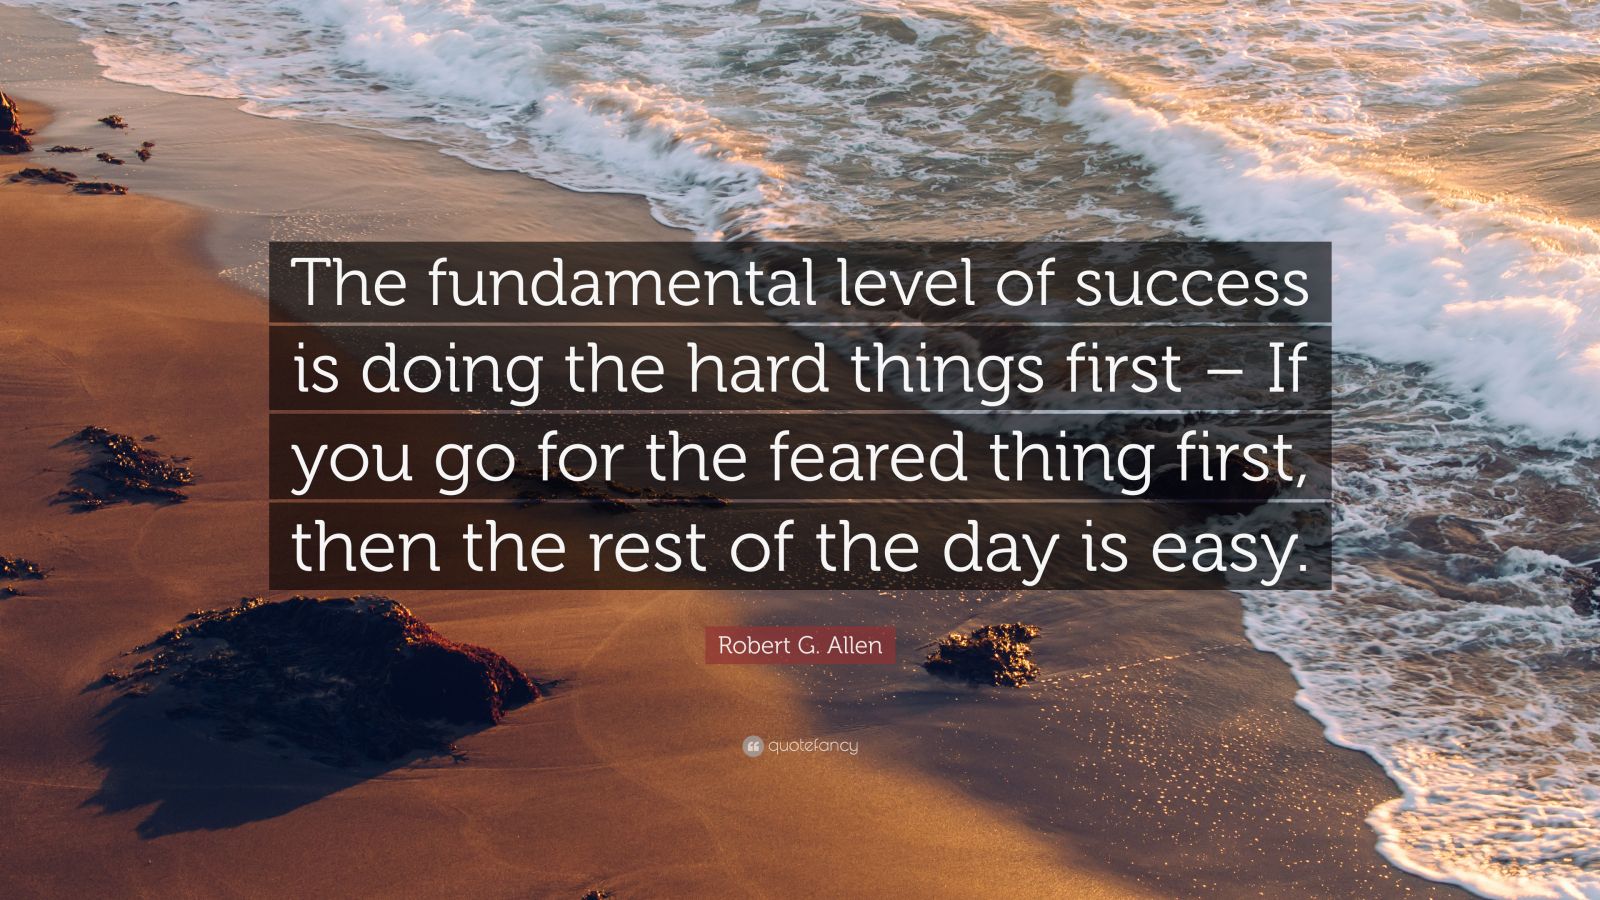 Robert G Allen Quote The fundamental level of success is doing the 